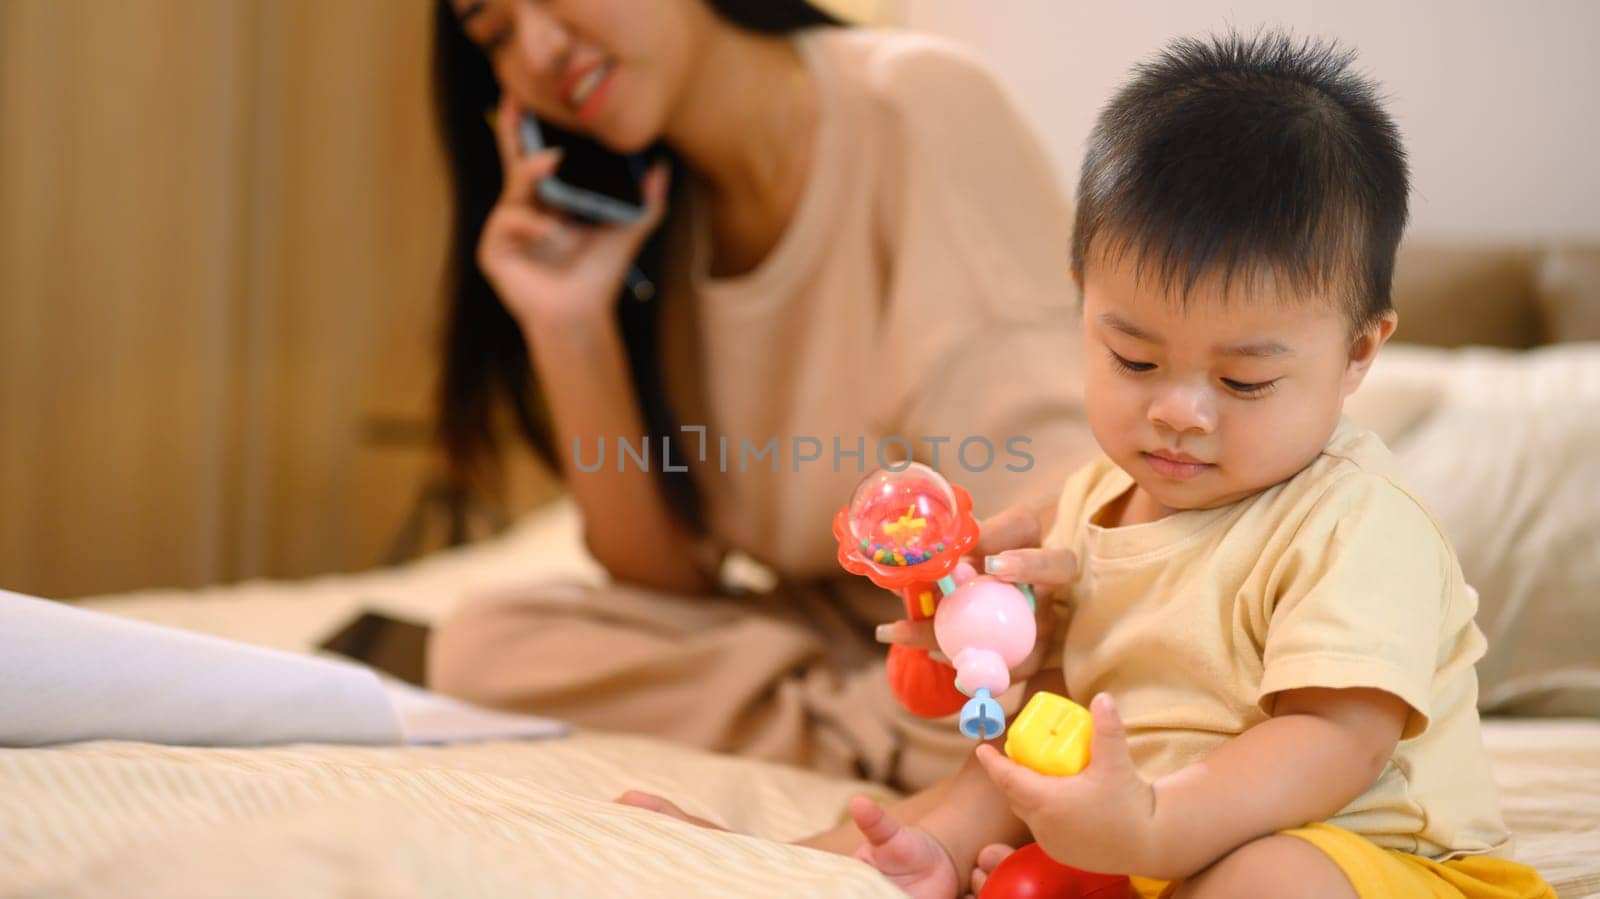 Busy young mother talking on cellphone and little baby boy playing with toy near her.